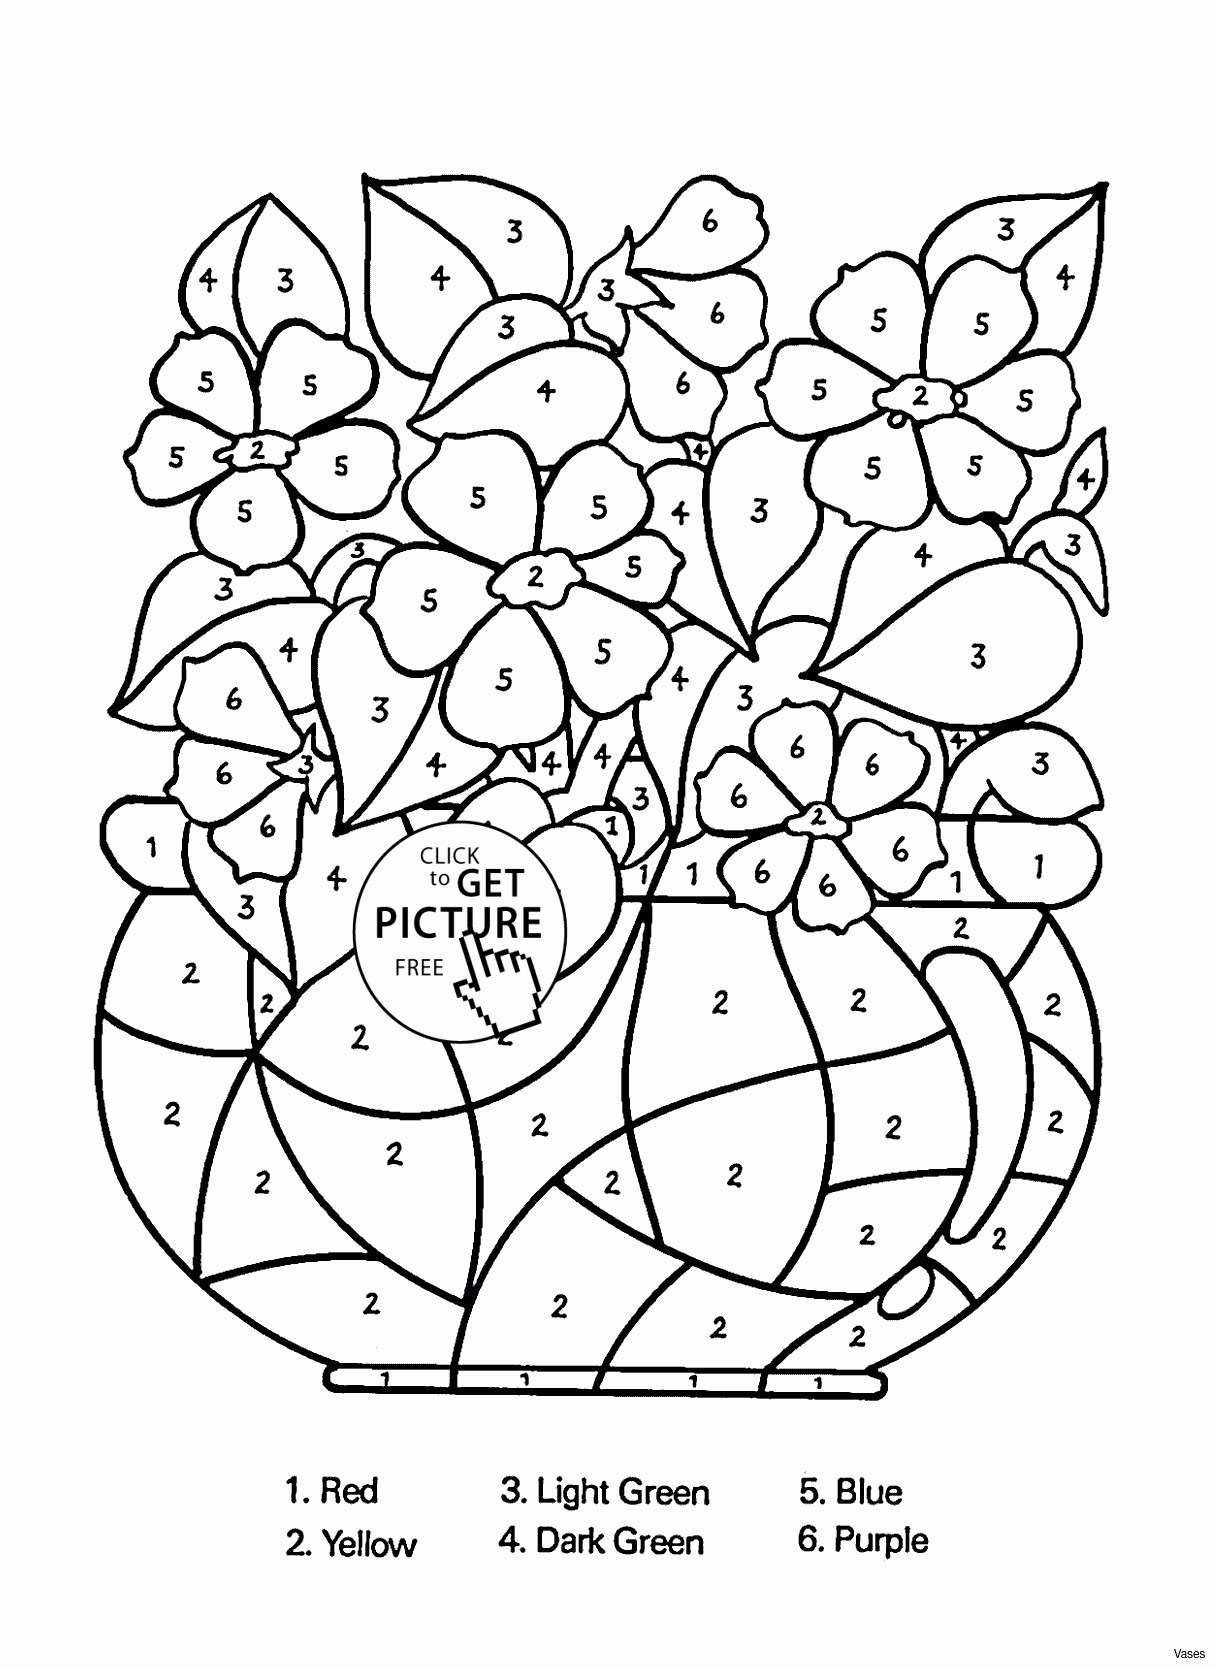 small hurricane vase of white glass vase elegant vases flower vase coloring page pages inside white glass vase elegant vases flower vase coloring page pages flowers in a top i 0d